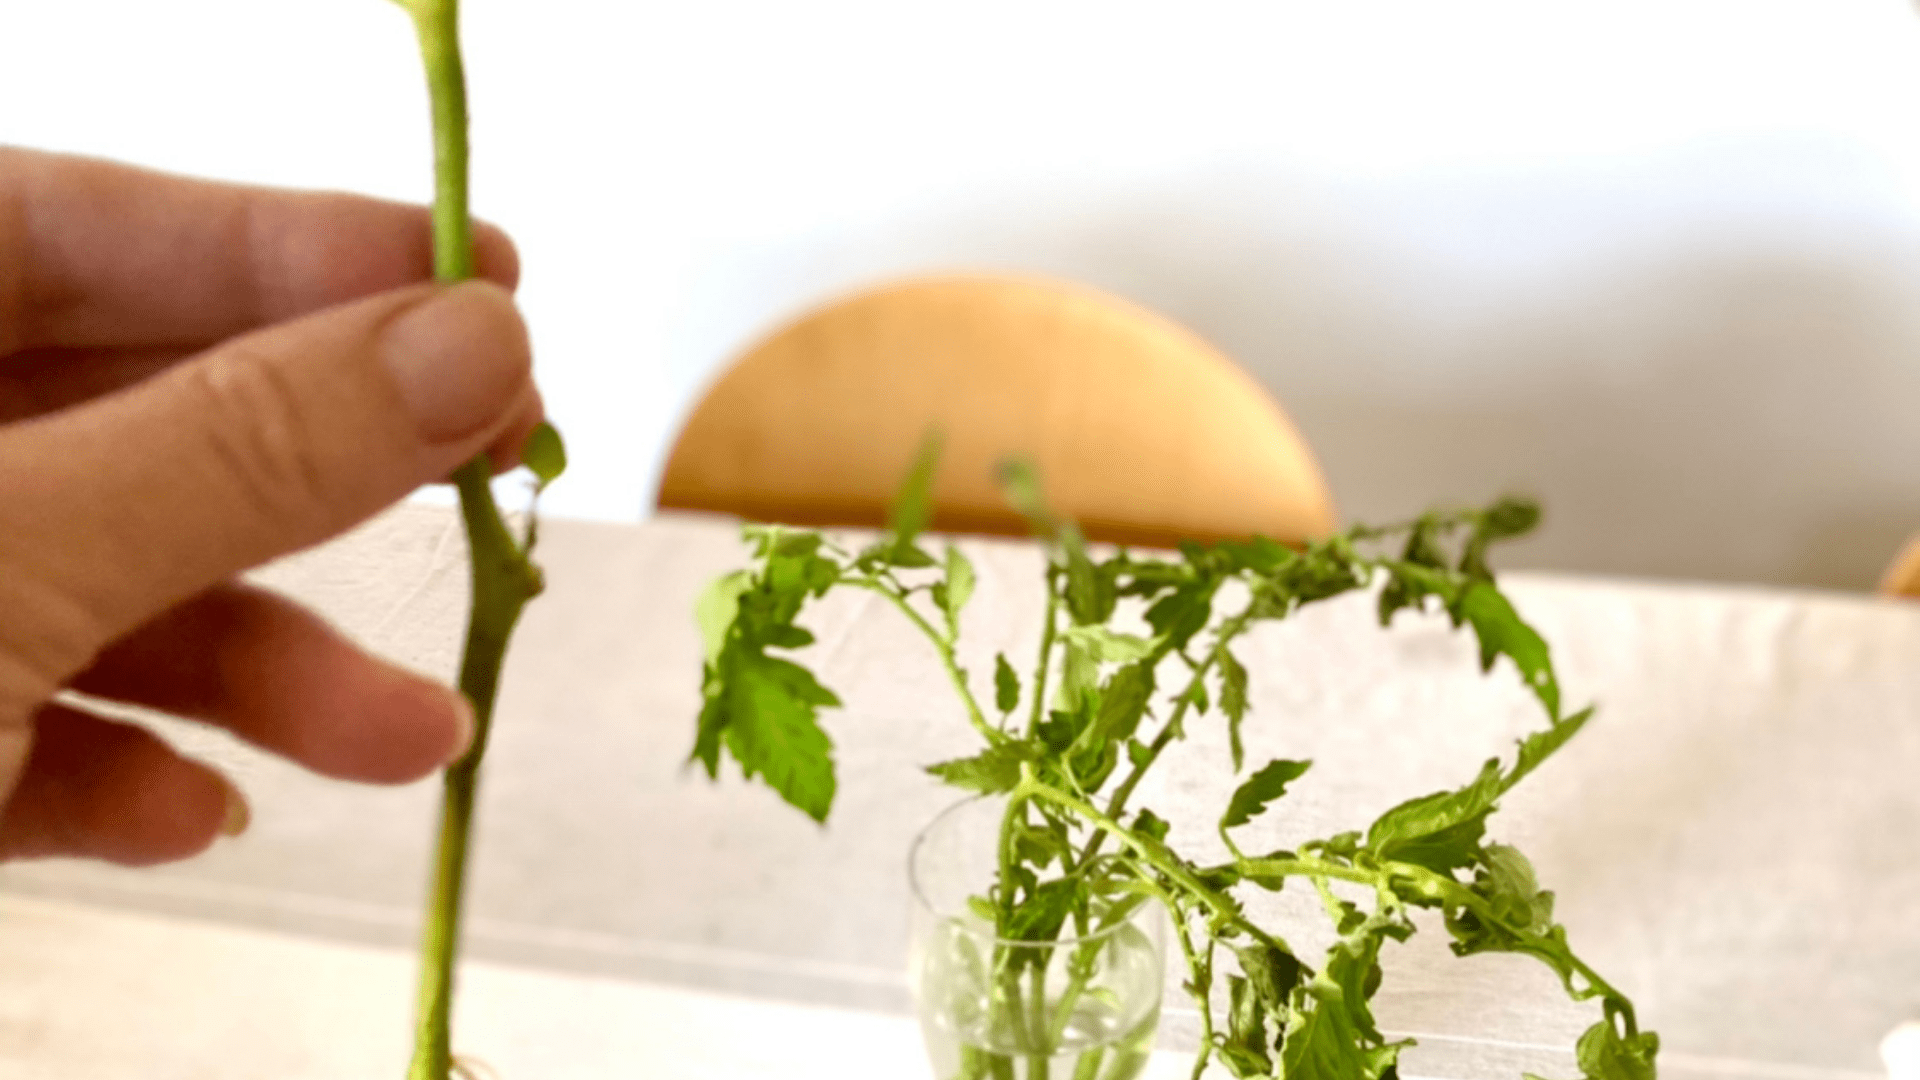 Growing tomatoes from cuttings